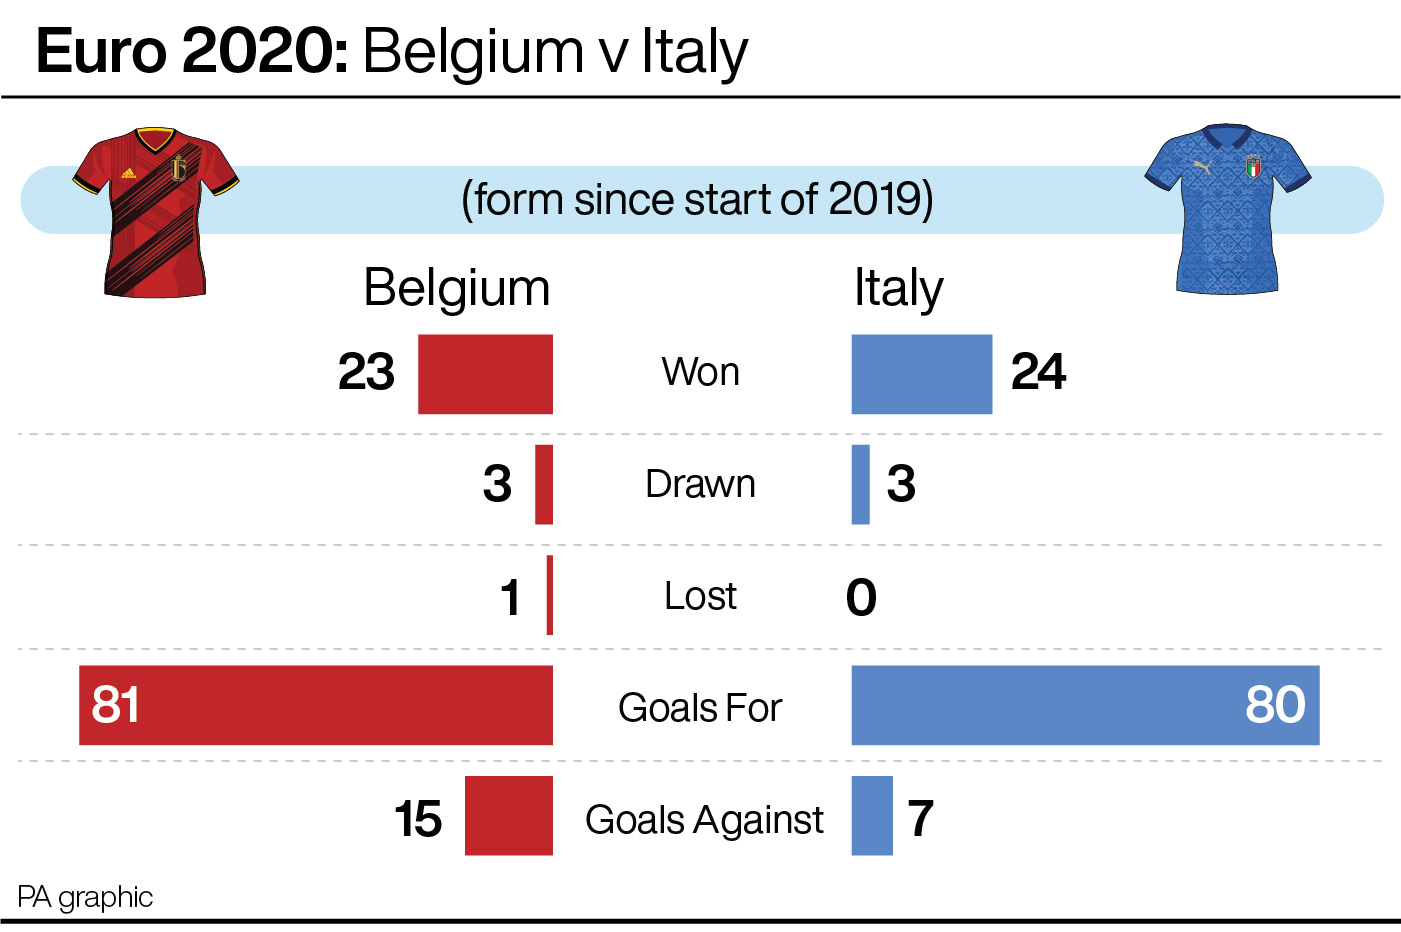 Belgium v Italy: record since start of 2019